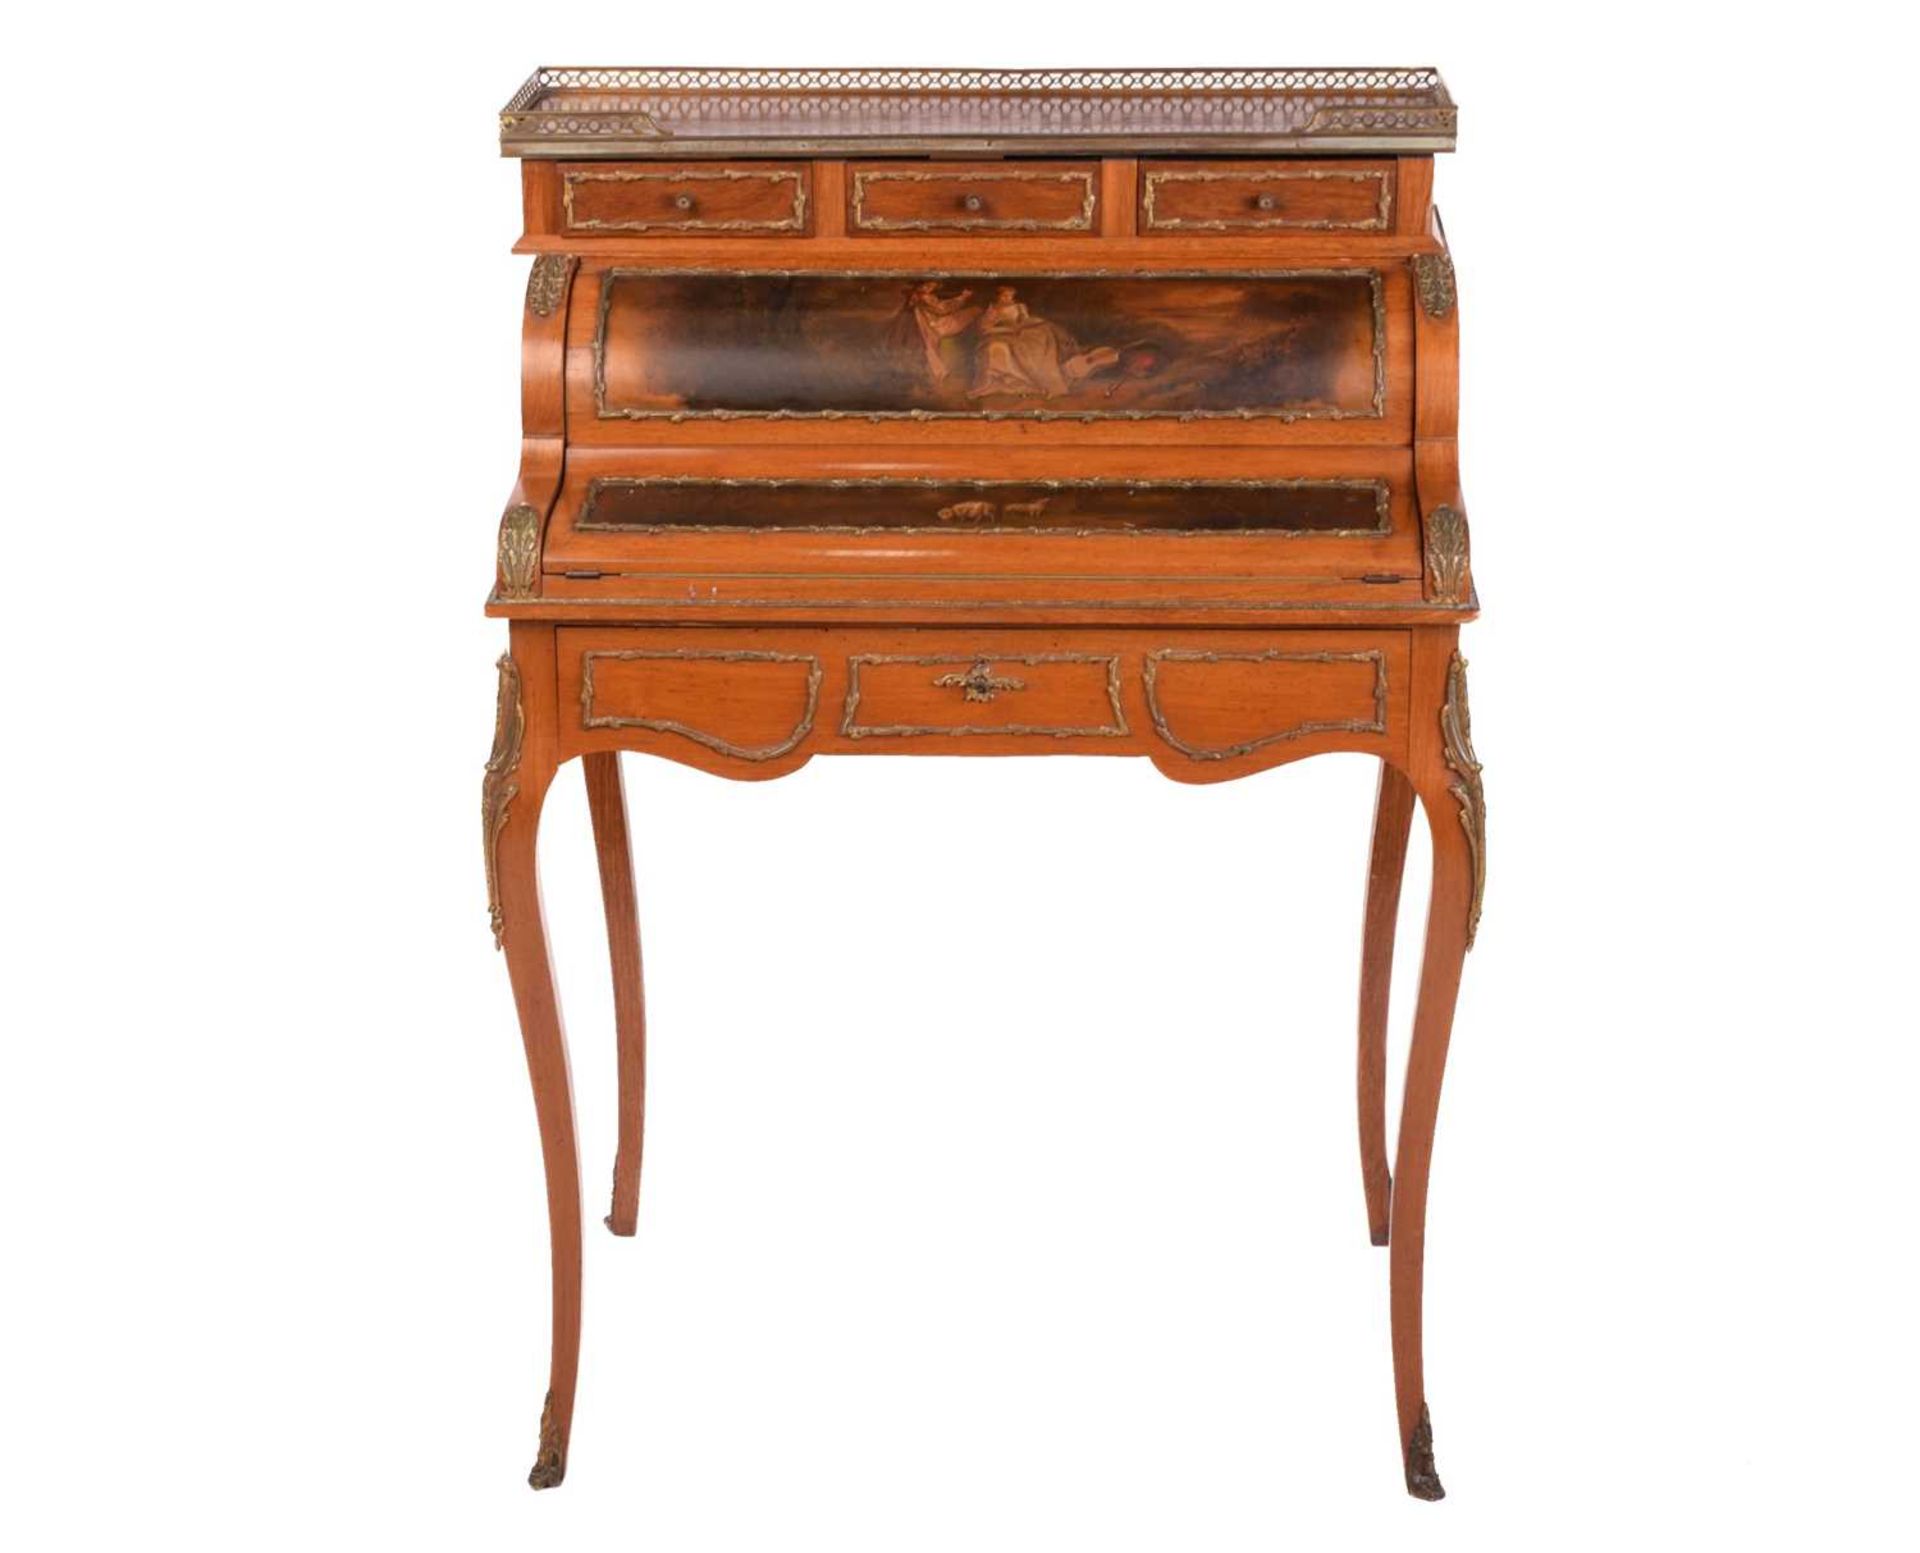 A French Louis XV style rosewood and Vernis Martin panelled Bureau de Cylinder, early 20th